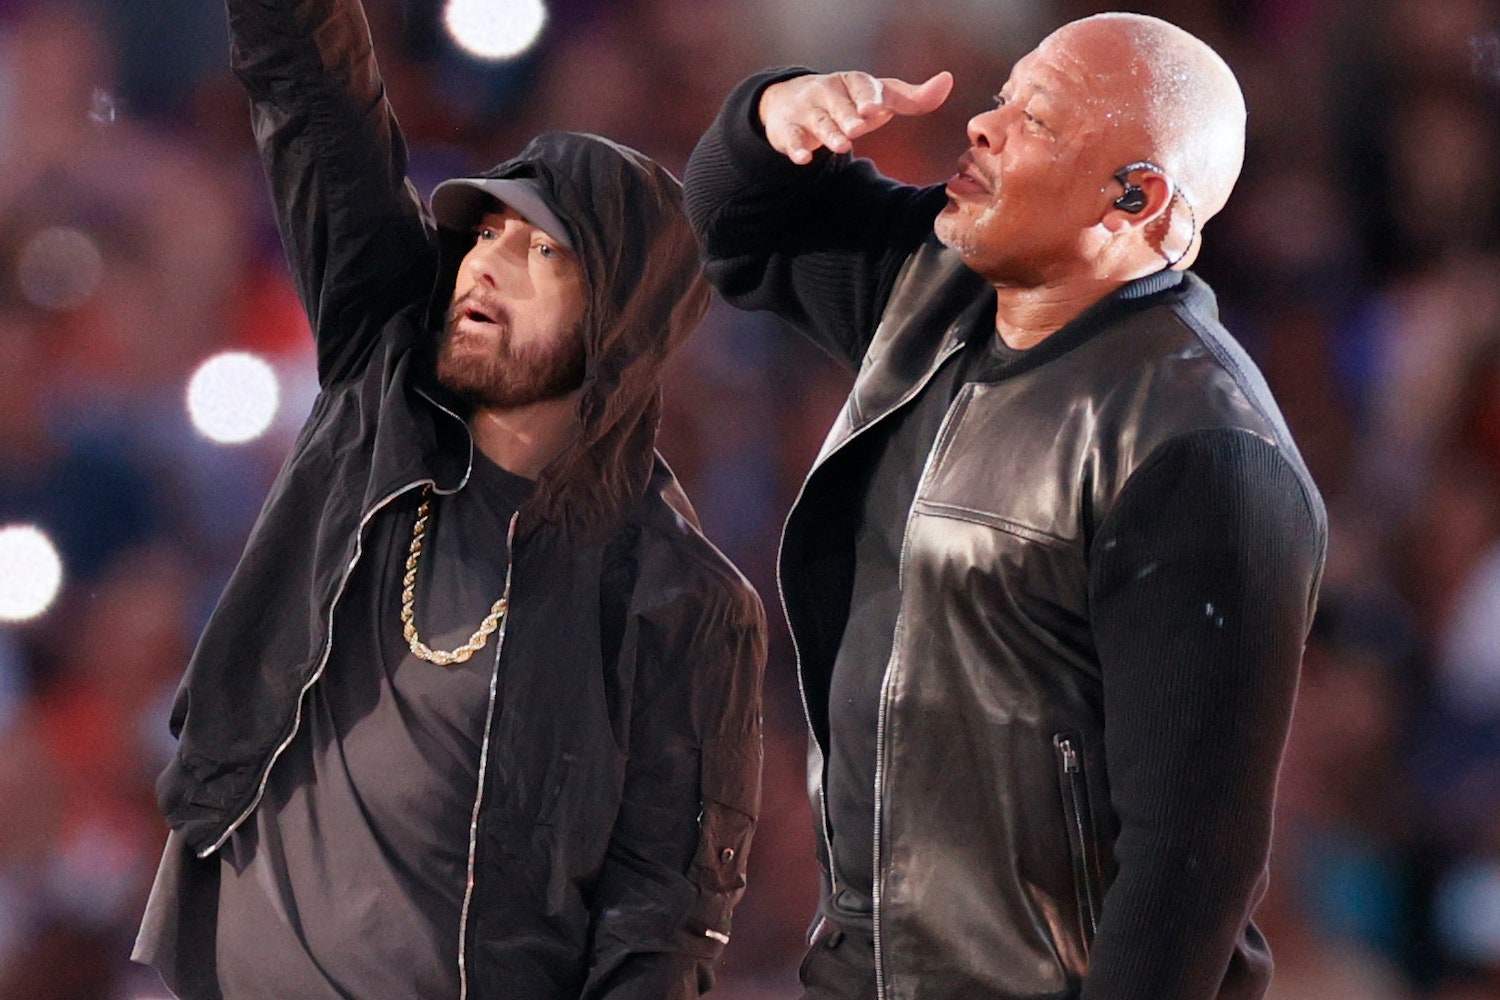 Eminem and CeeLo Green Share Dr. Dre–Produced New Song “The King and I” |  Pitchfork